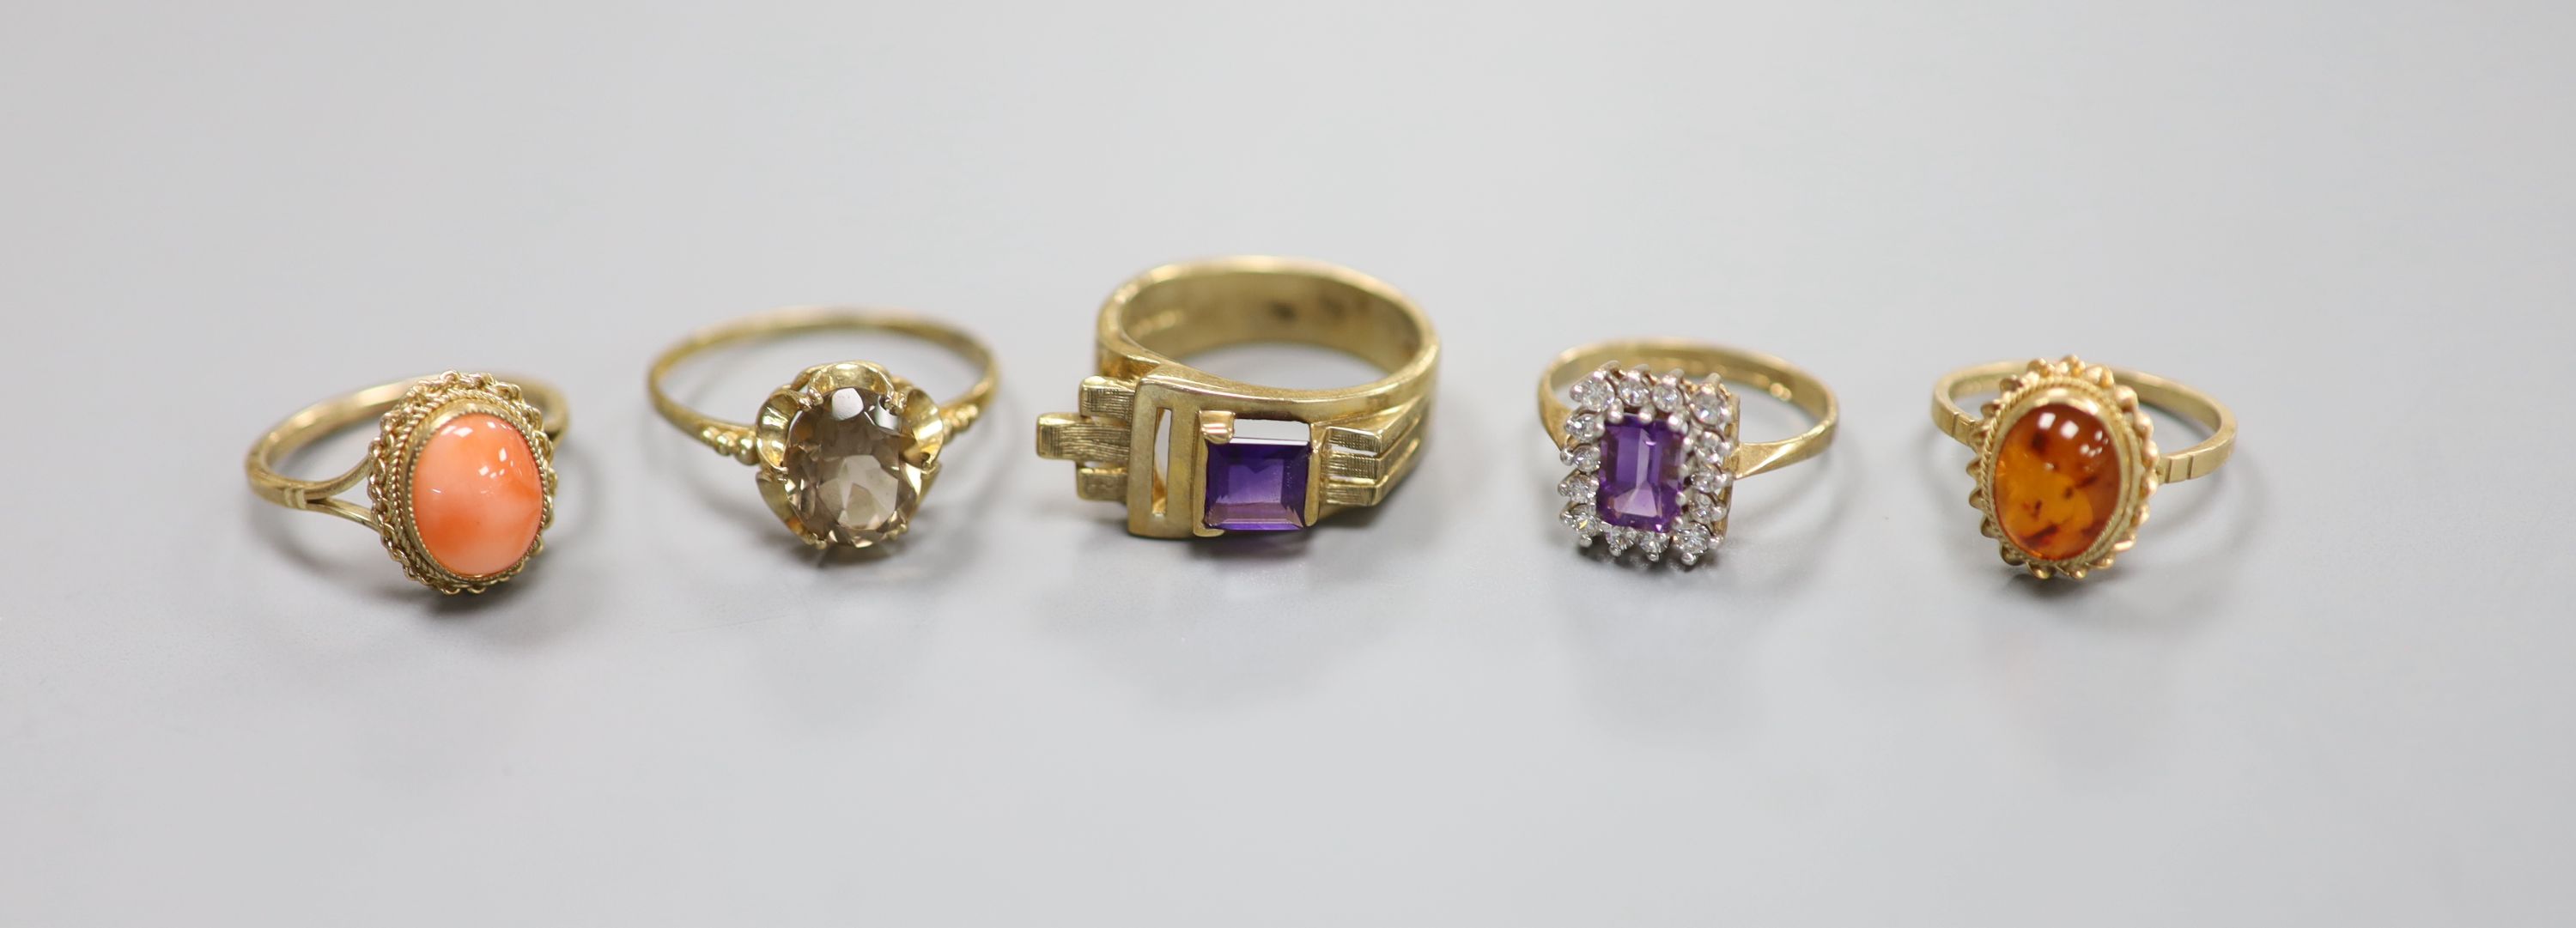 Five assorted modern 9ct gold and gem set rings, including coral, amber and amethyst